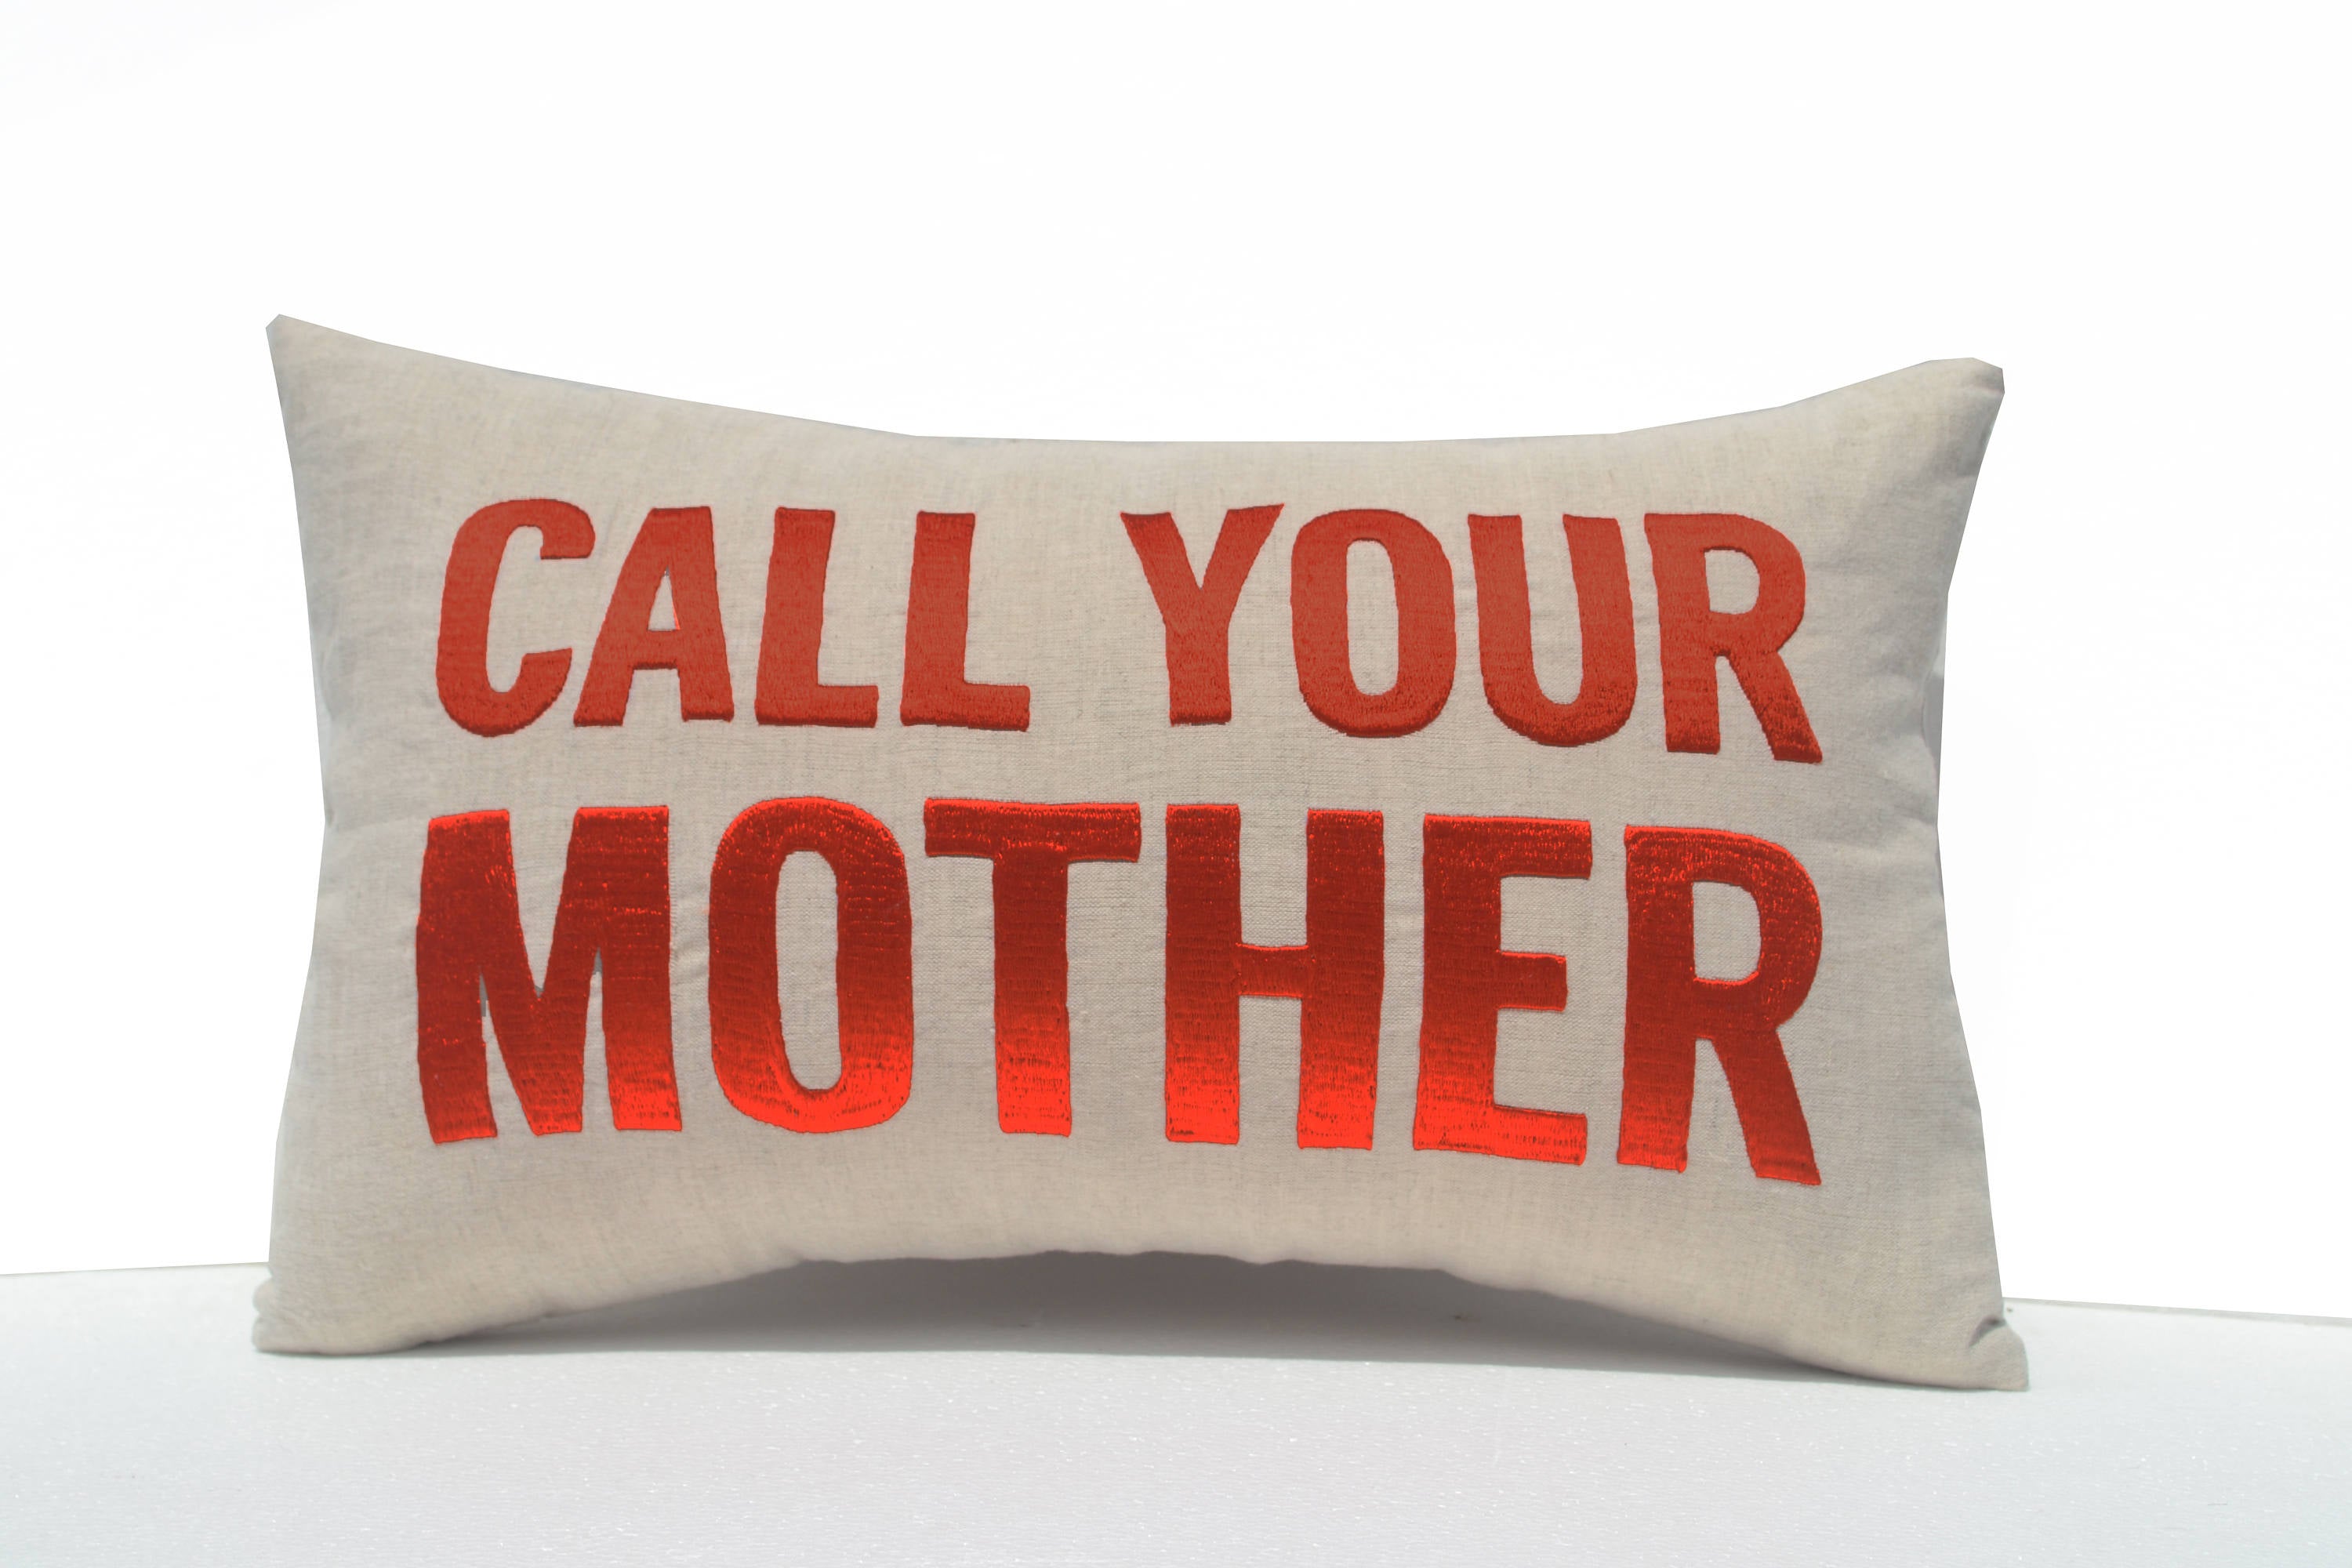 Call Your Mother Embroidered Pillow Cover, Decorative Cushion